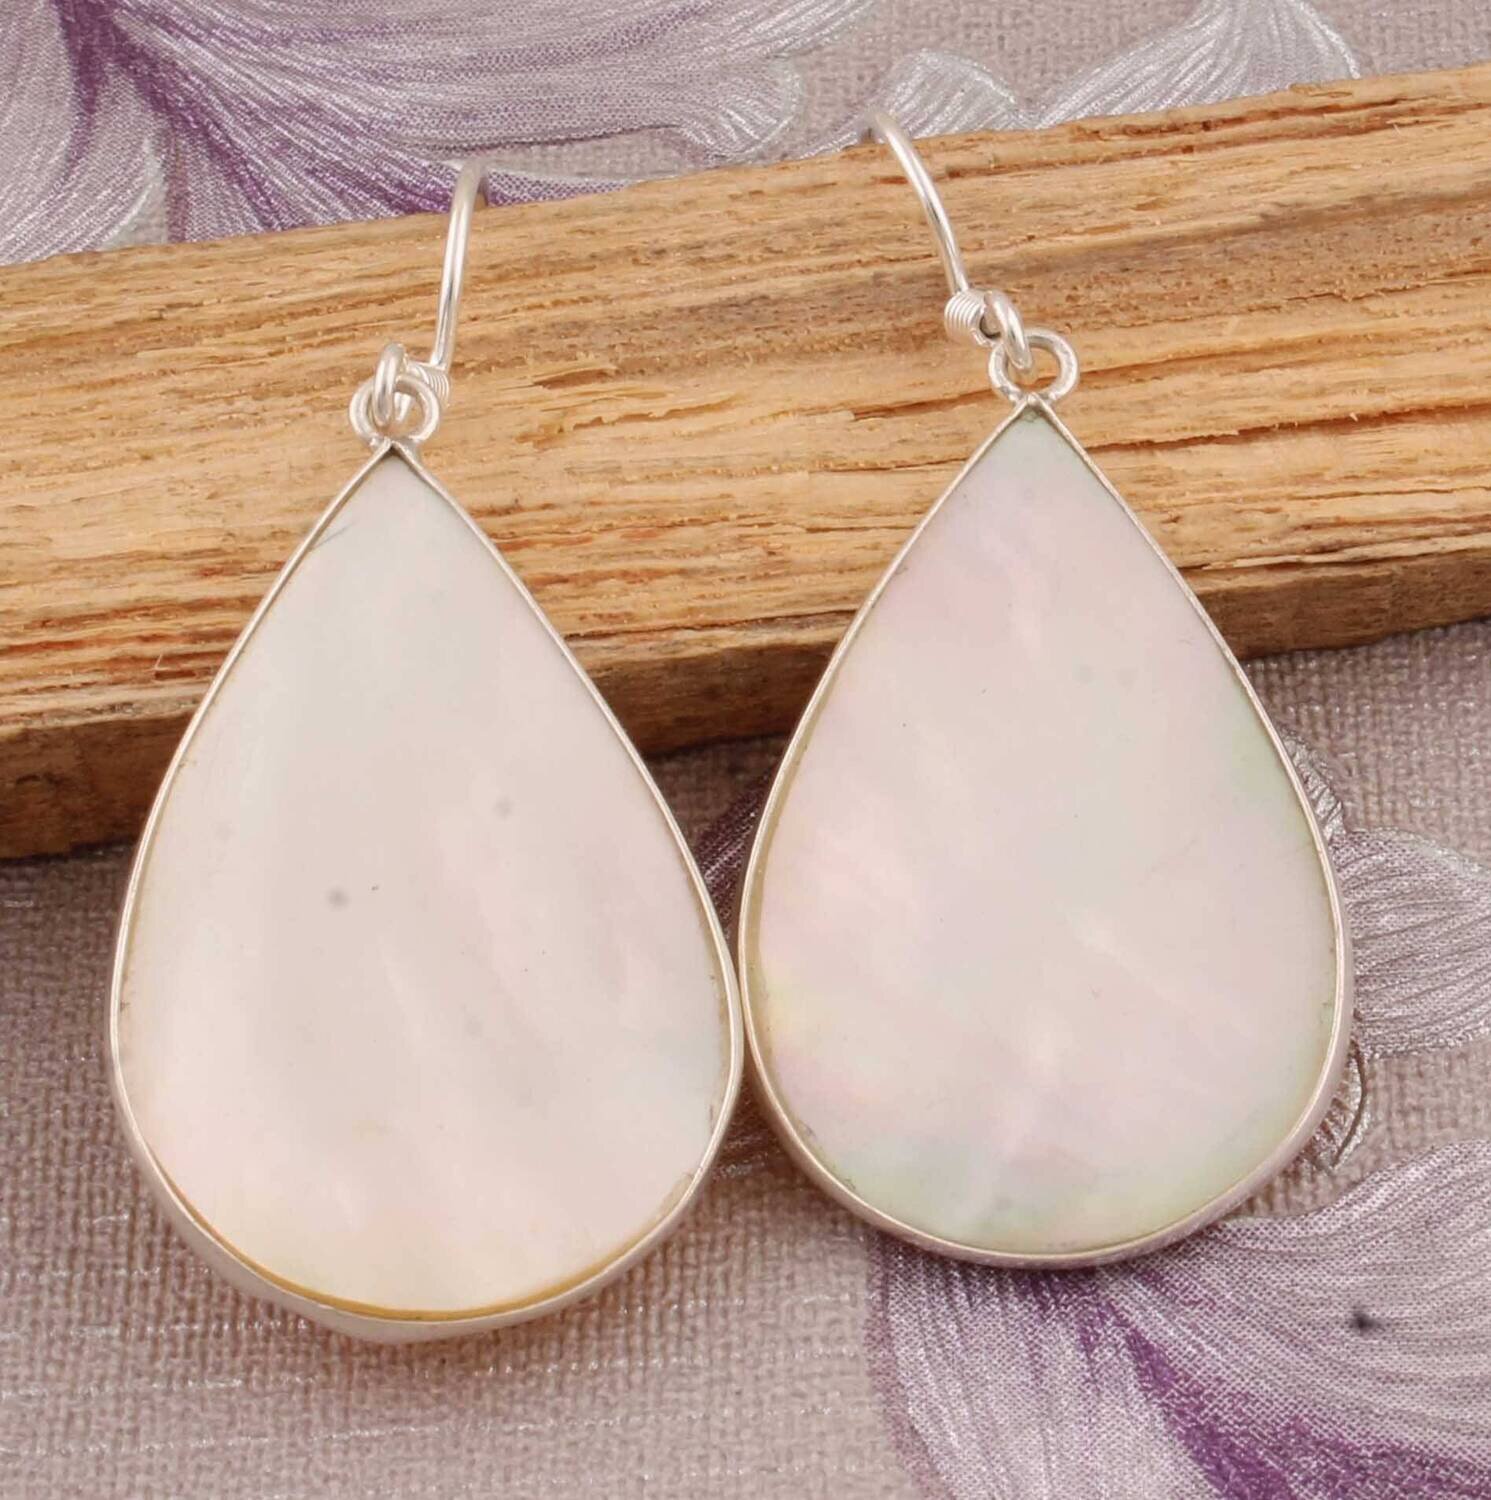 Natural Mother Of Pearl AAA+Quality Gemstone Earring 925-Sterling Silver Earring,Antique Silver Earring Beautiful Gift Earring One-Of-Kind